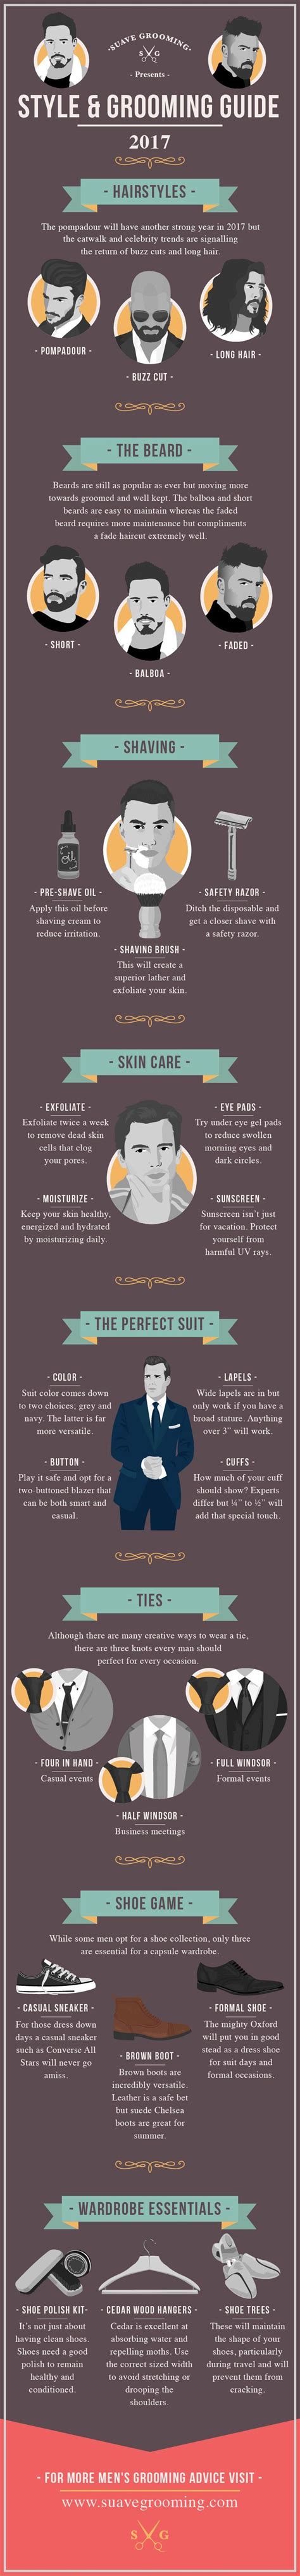 style grooming guide  infographic grooming style mens grooming